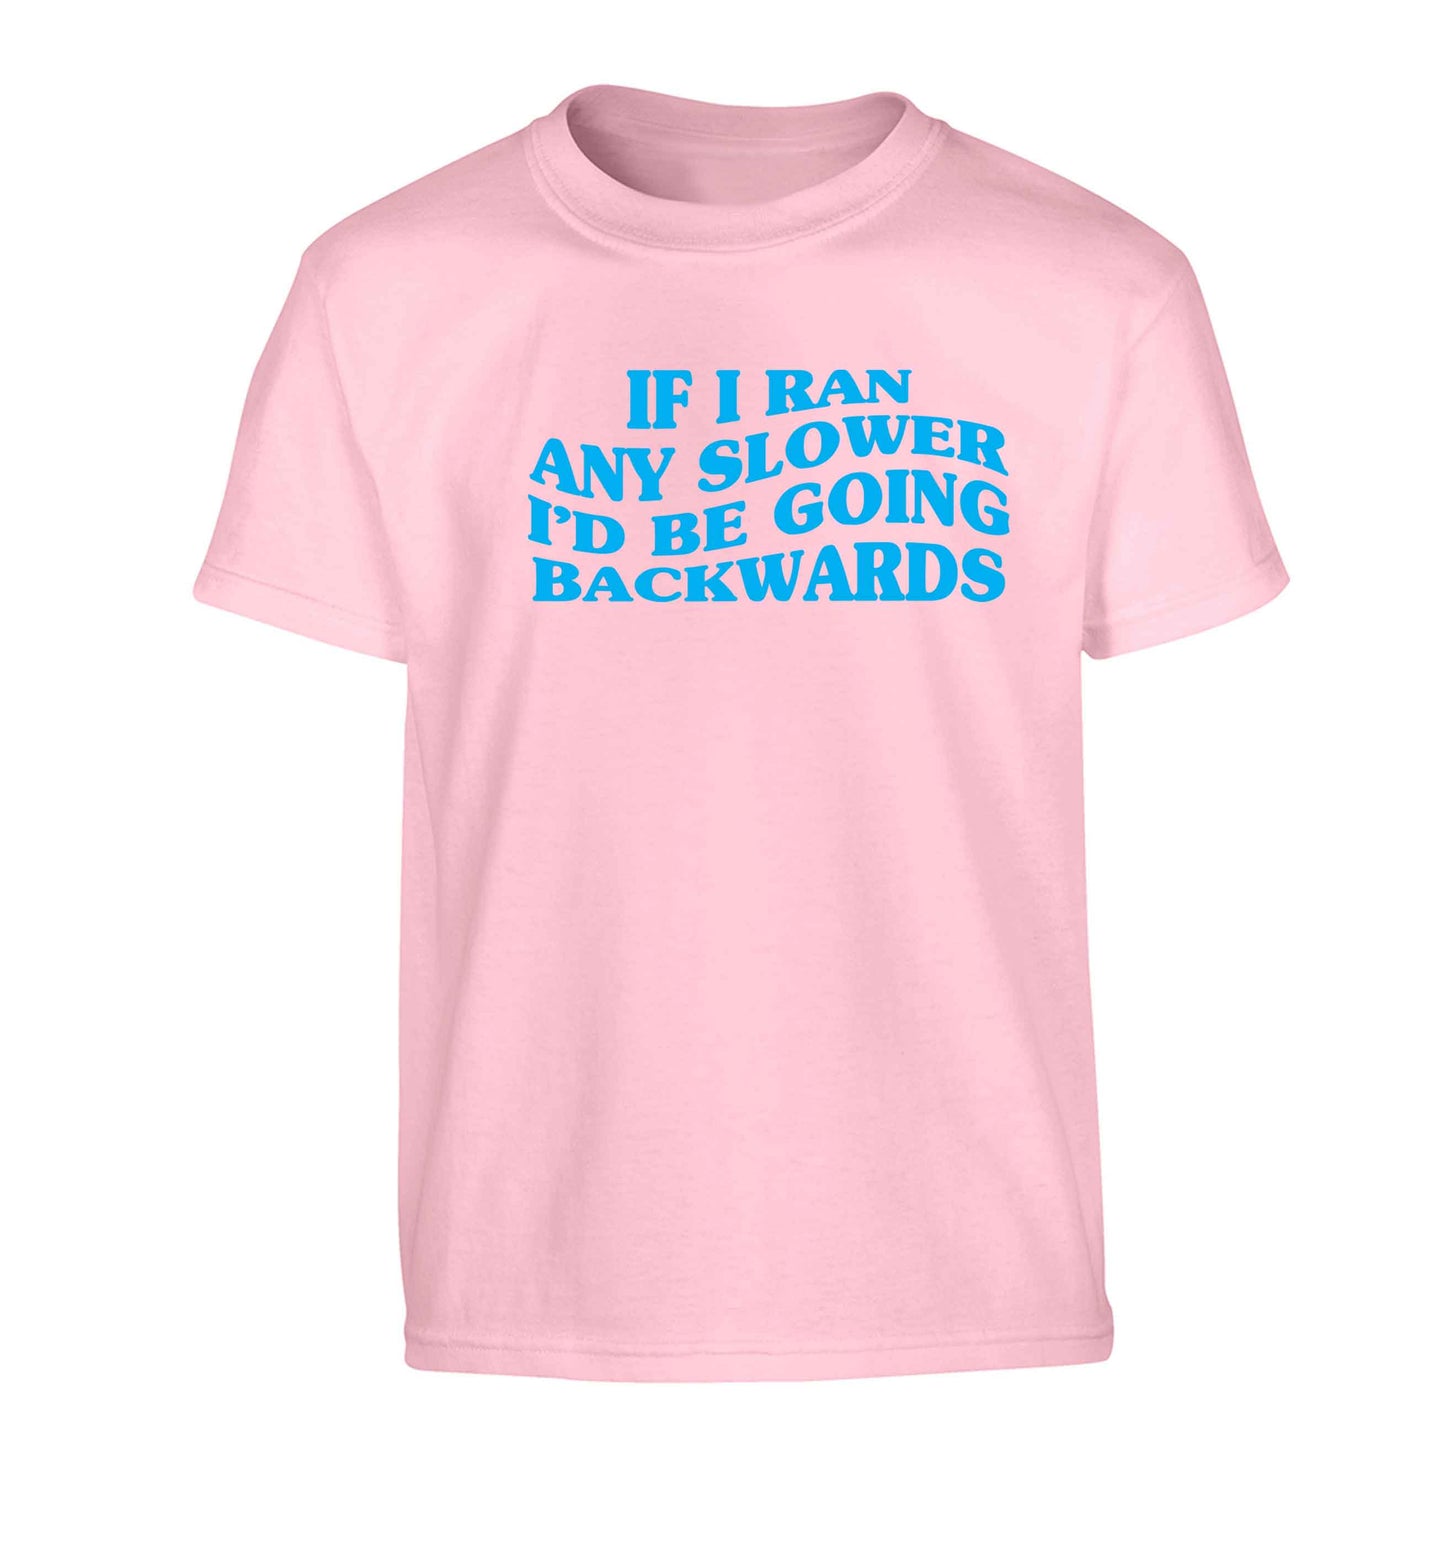 If I ran any slower I'd be going backwards Children's light pink Tshirt 12-13 Years